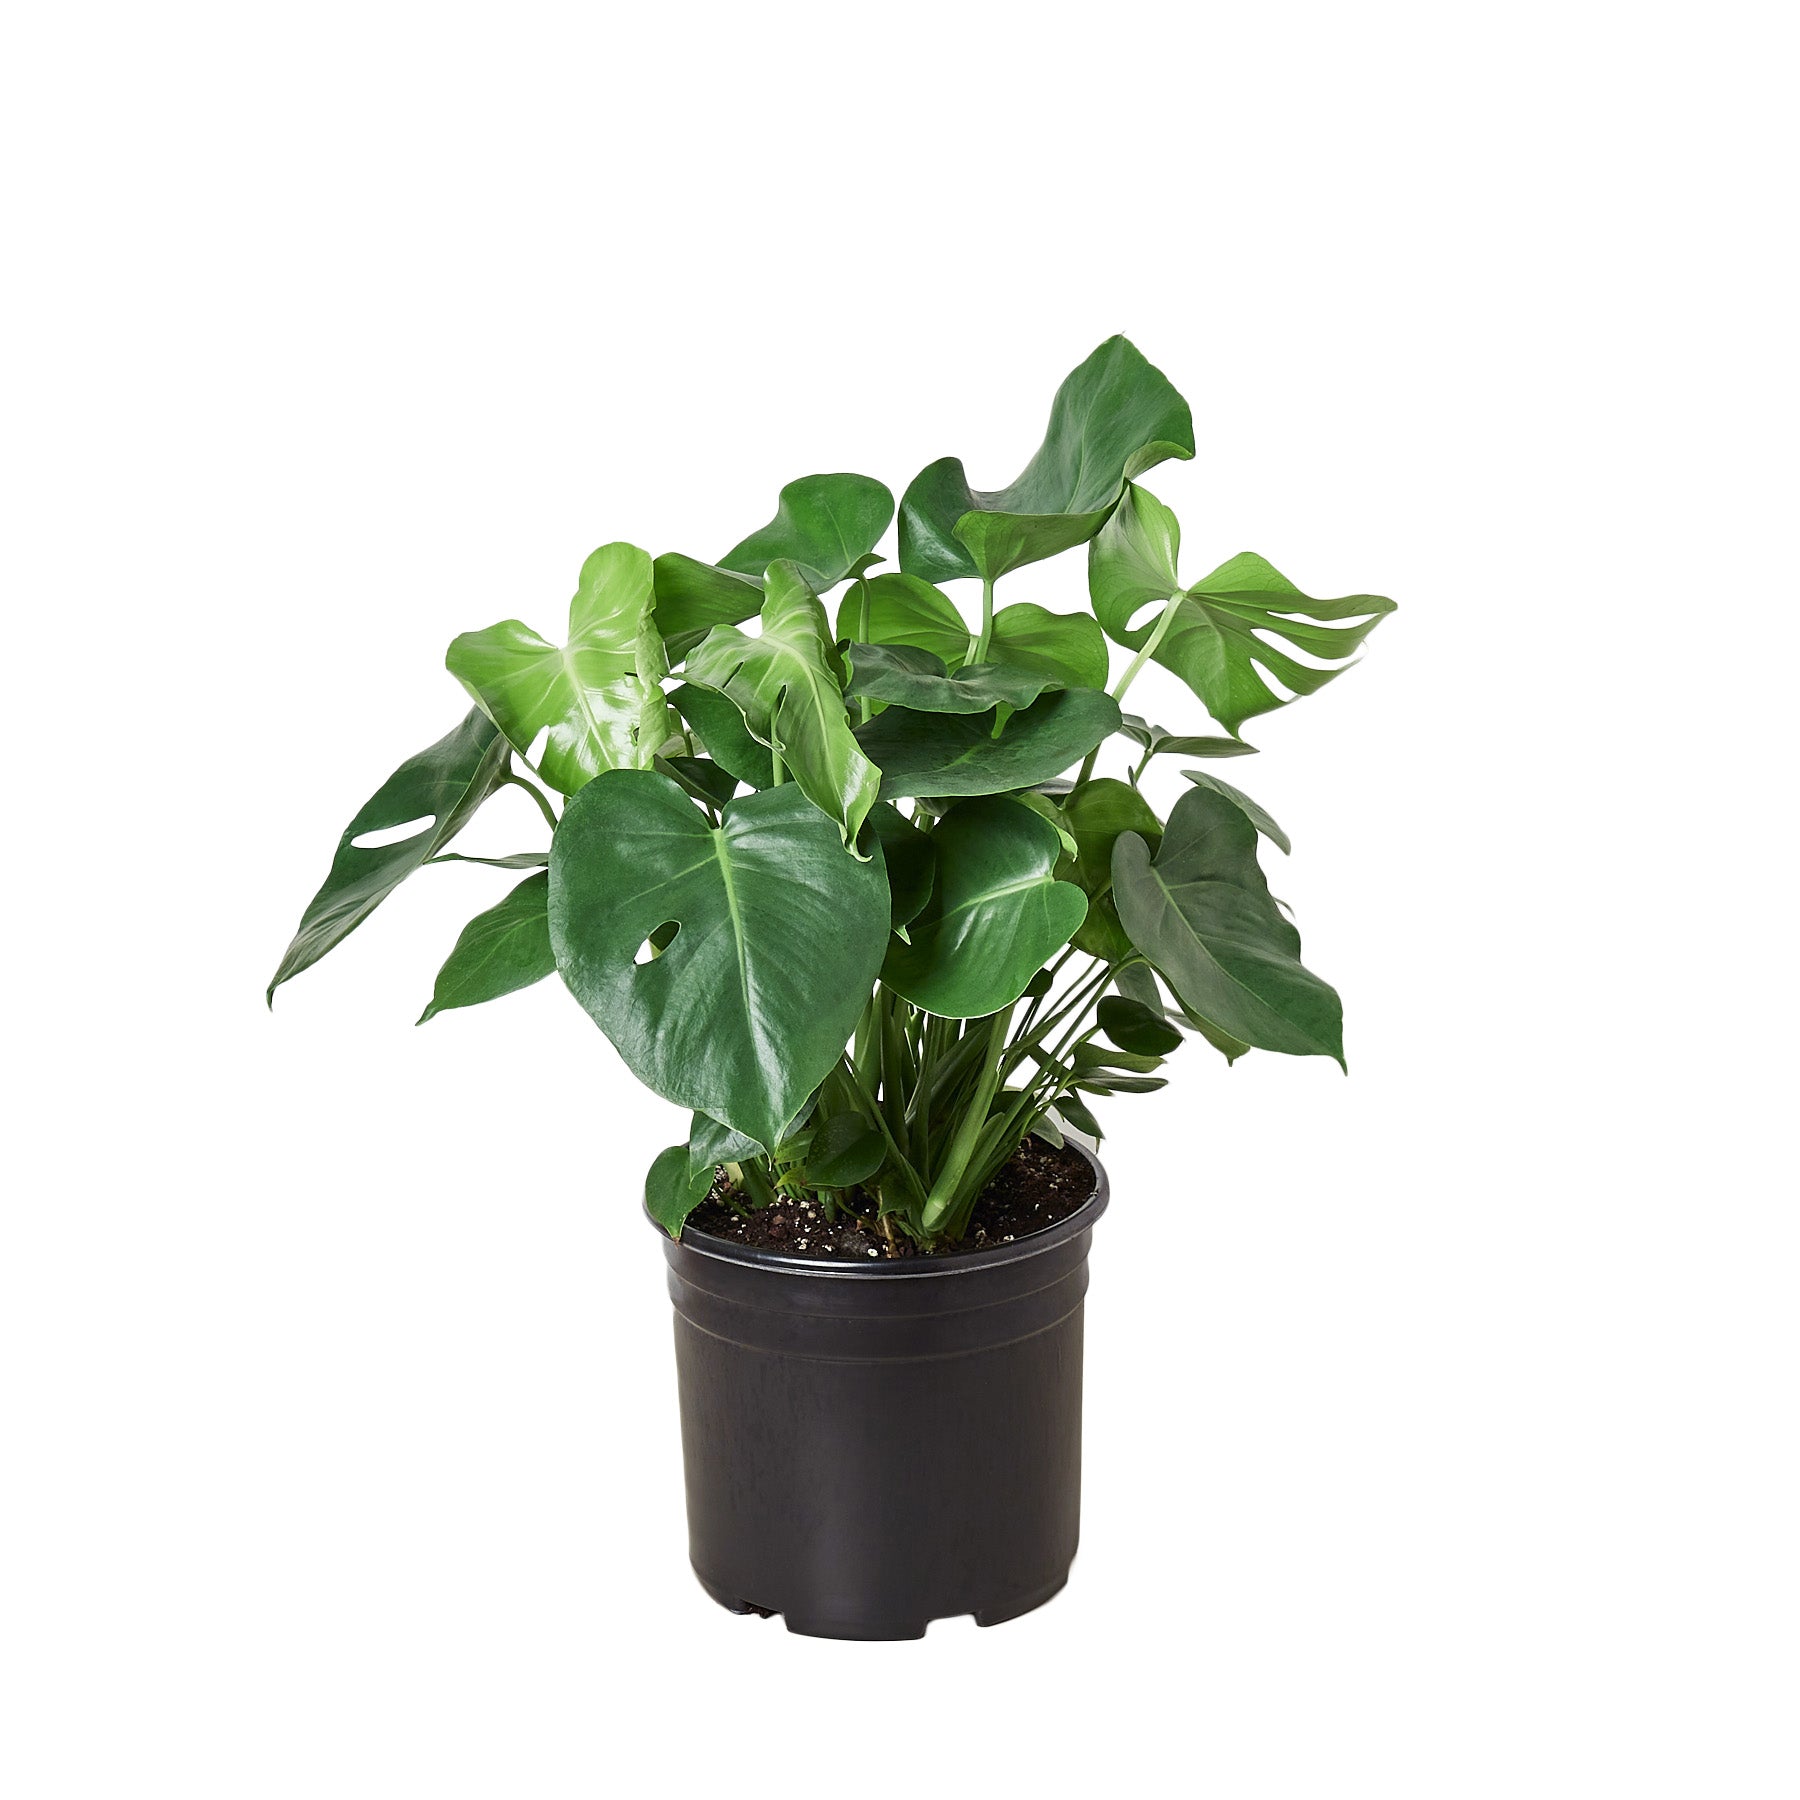 A plant in a black pot displayed on a white background at a garden center near me.